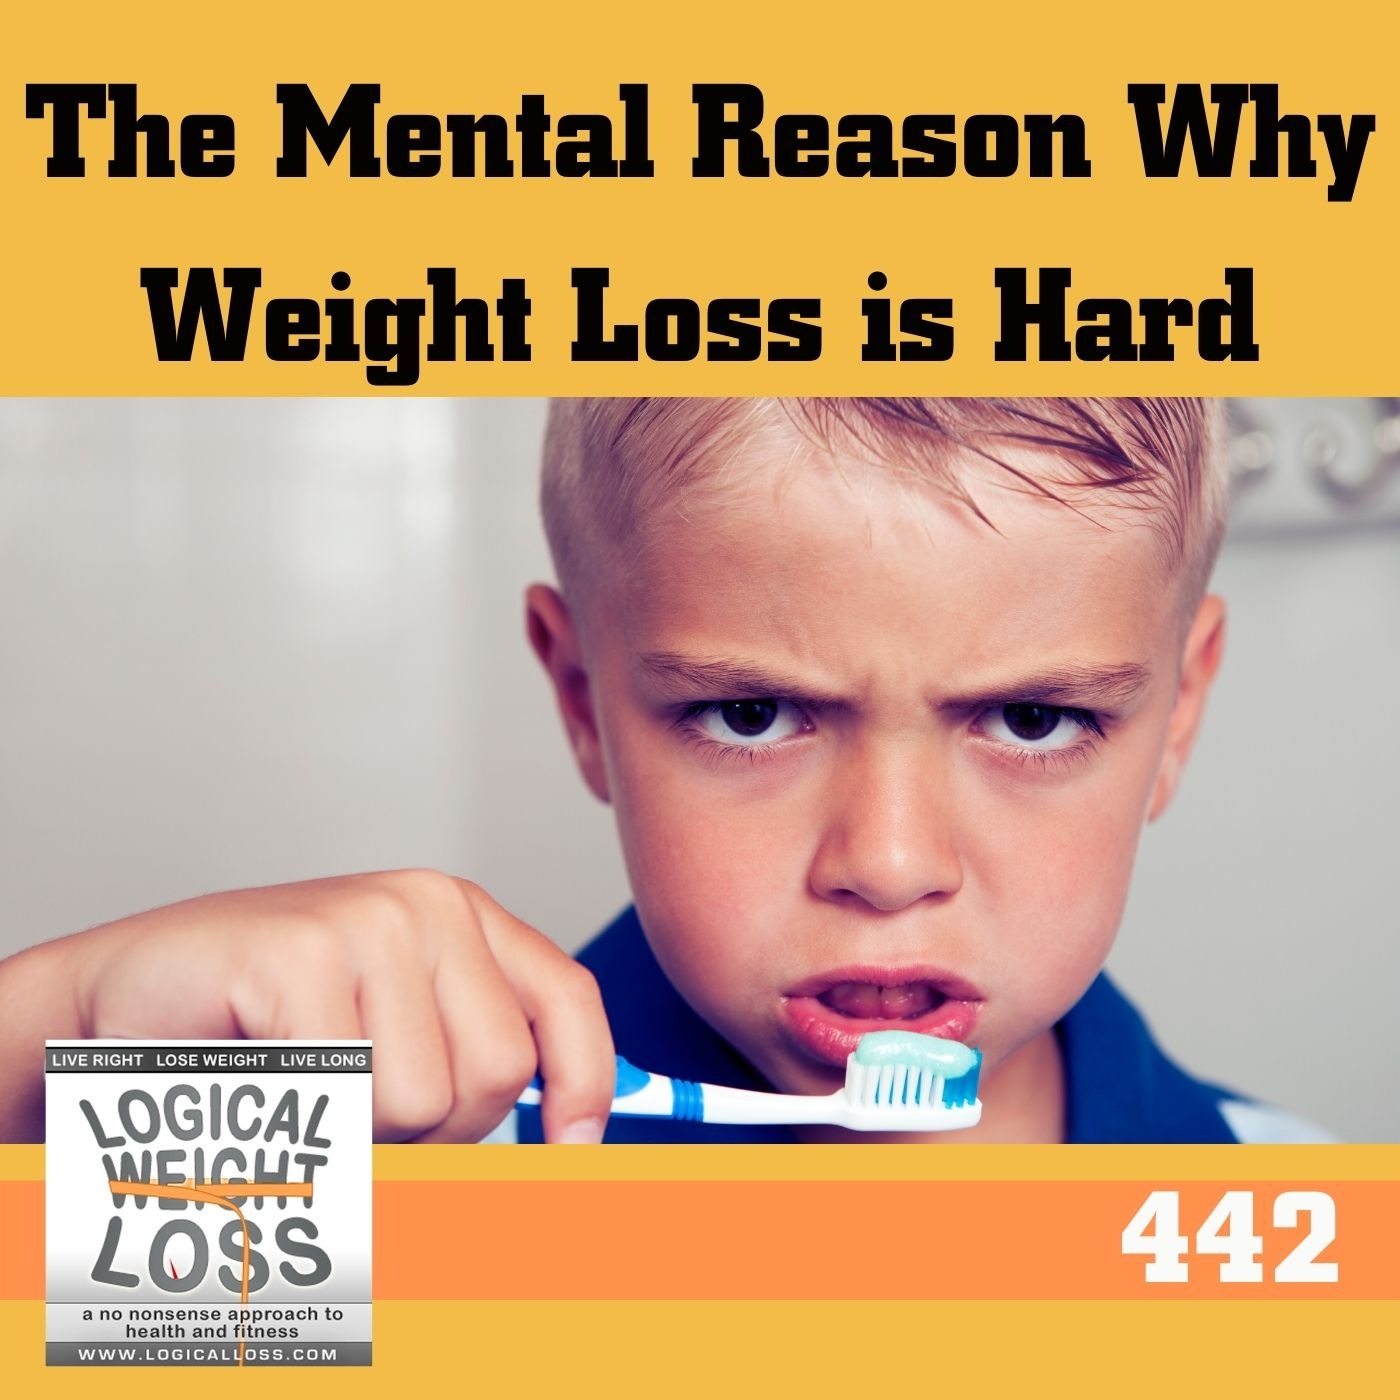 The Mental Reason Why Weight Loss is Hard Image